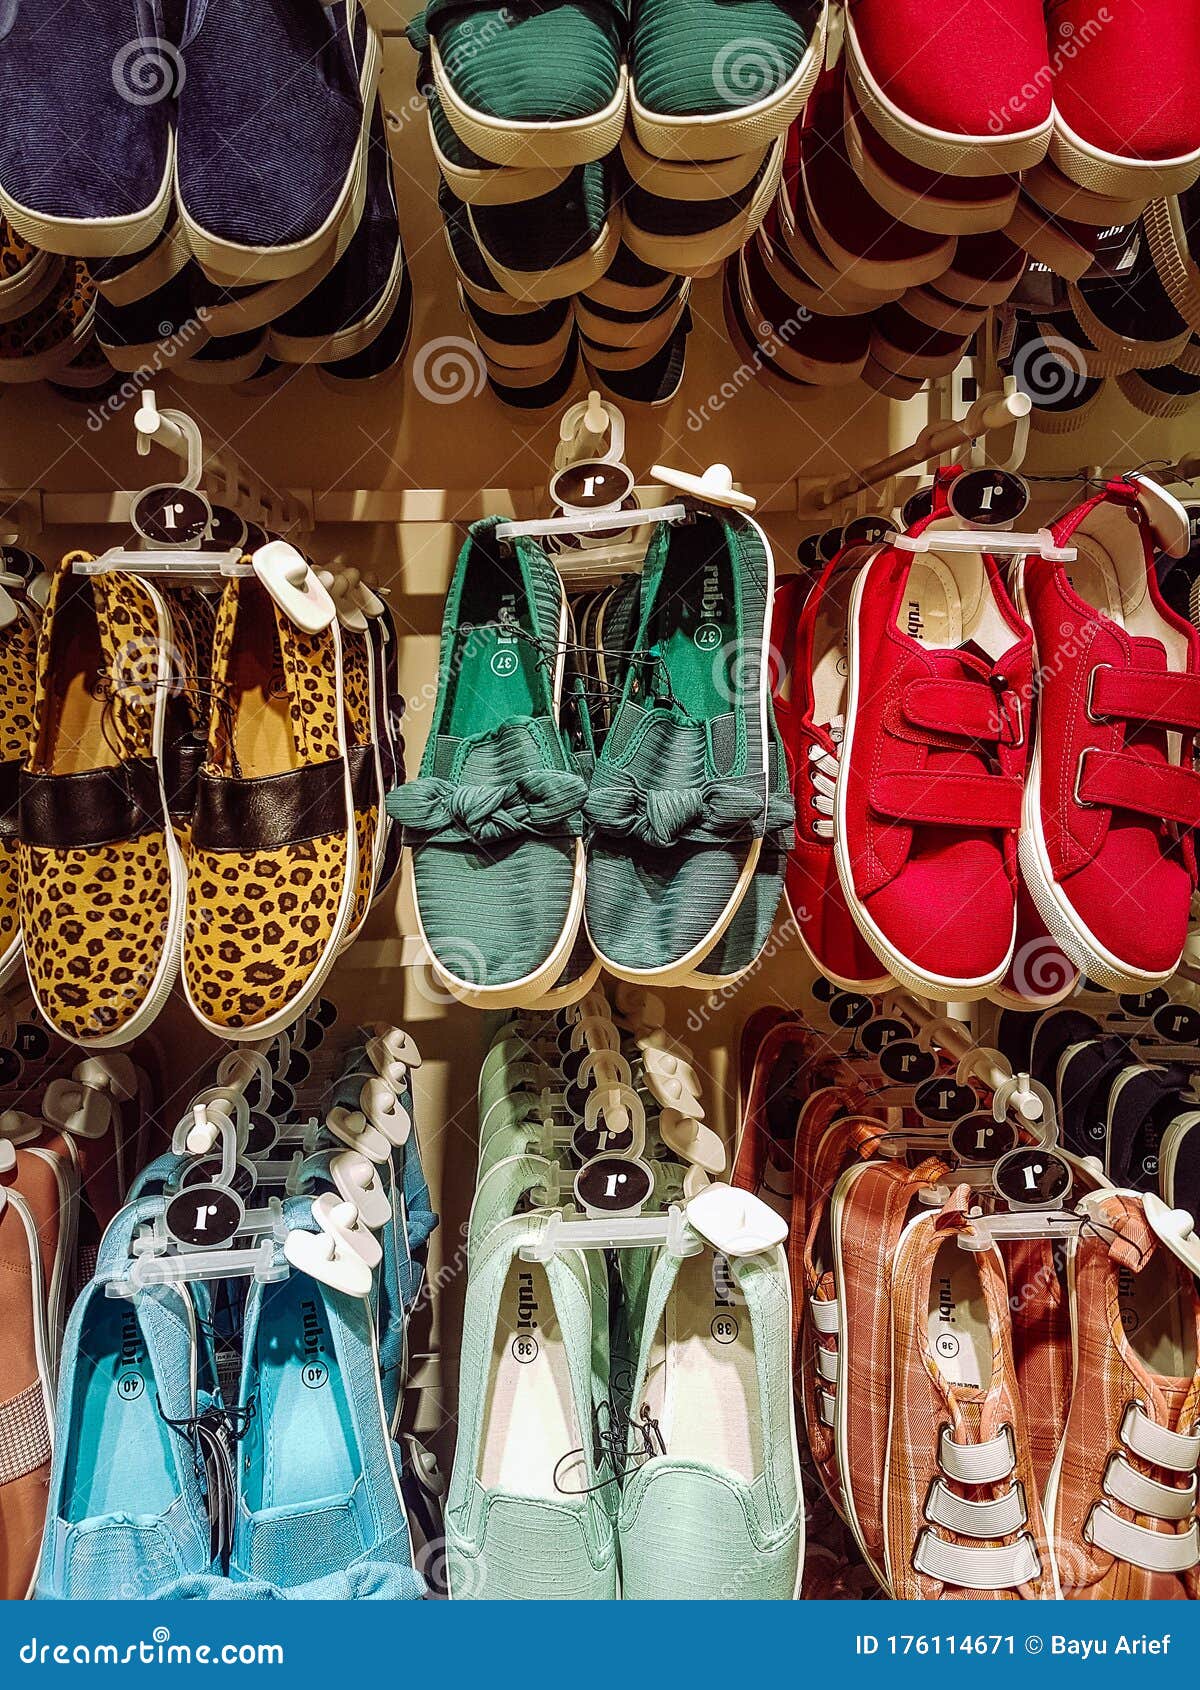 A Display Rack Full of Shoes in Colorful Ruby Shoe Stores. Stock Image ...